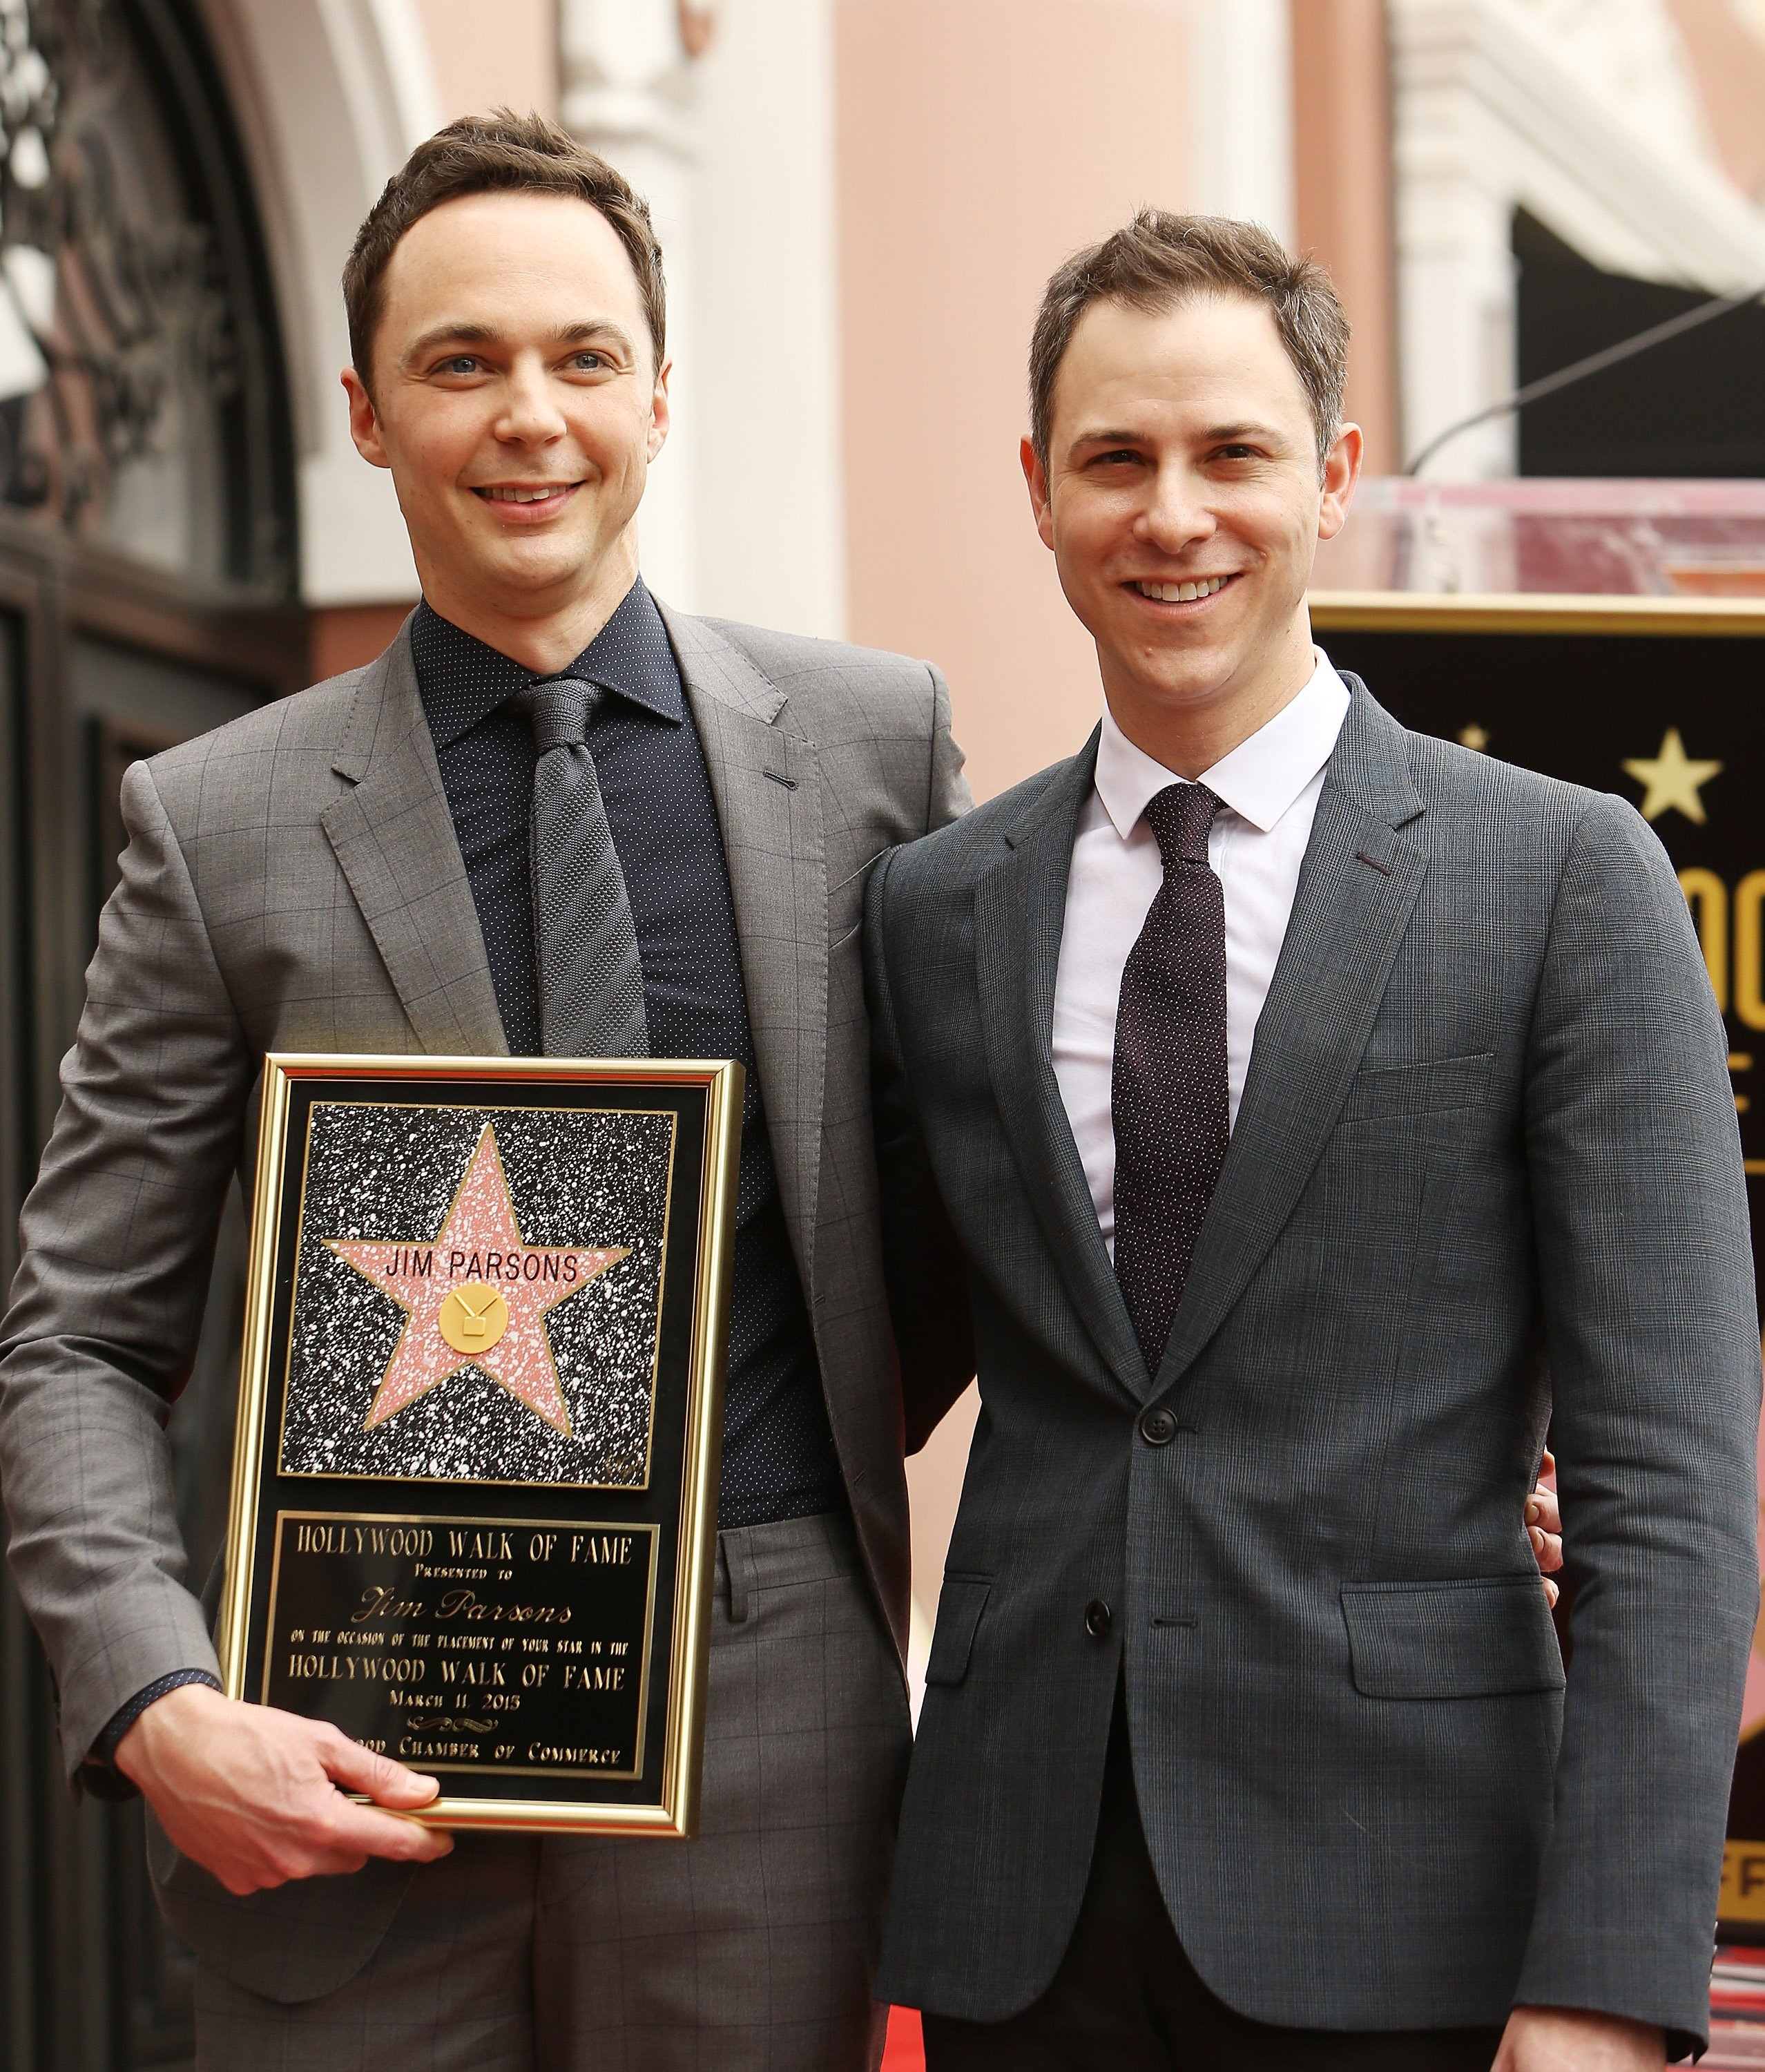 Jim Parsons and Todd Spiewak at the ceremony honoring Jim Parsons with a Star on The Hollywood Walk of Fame on March 11, 2015 | Source: Getty Images